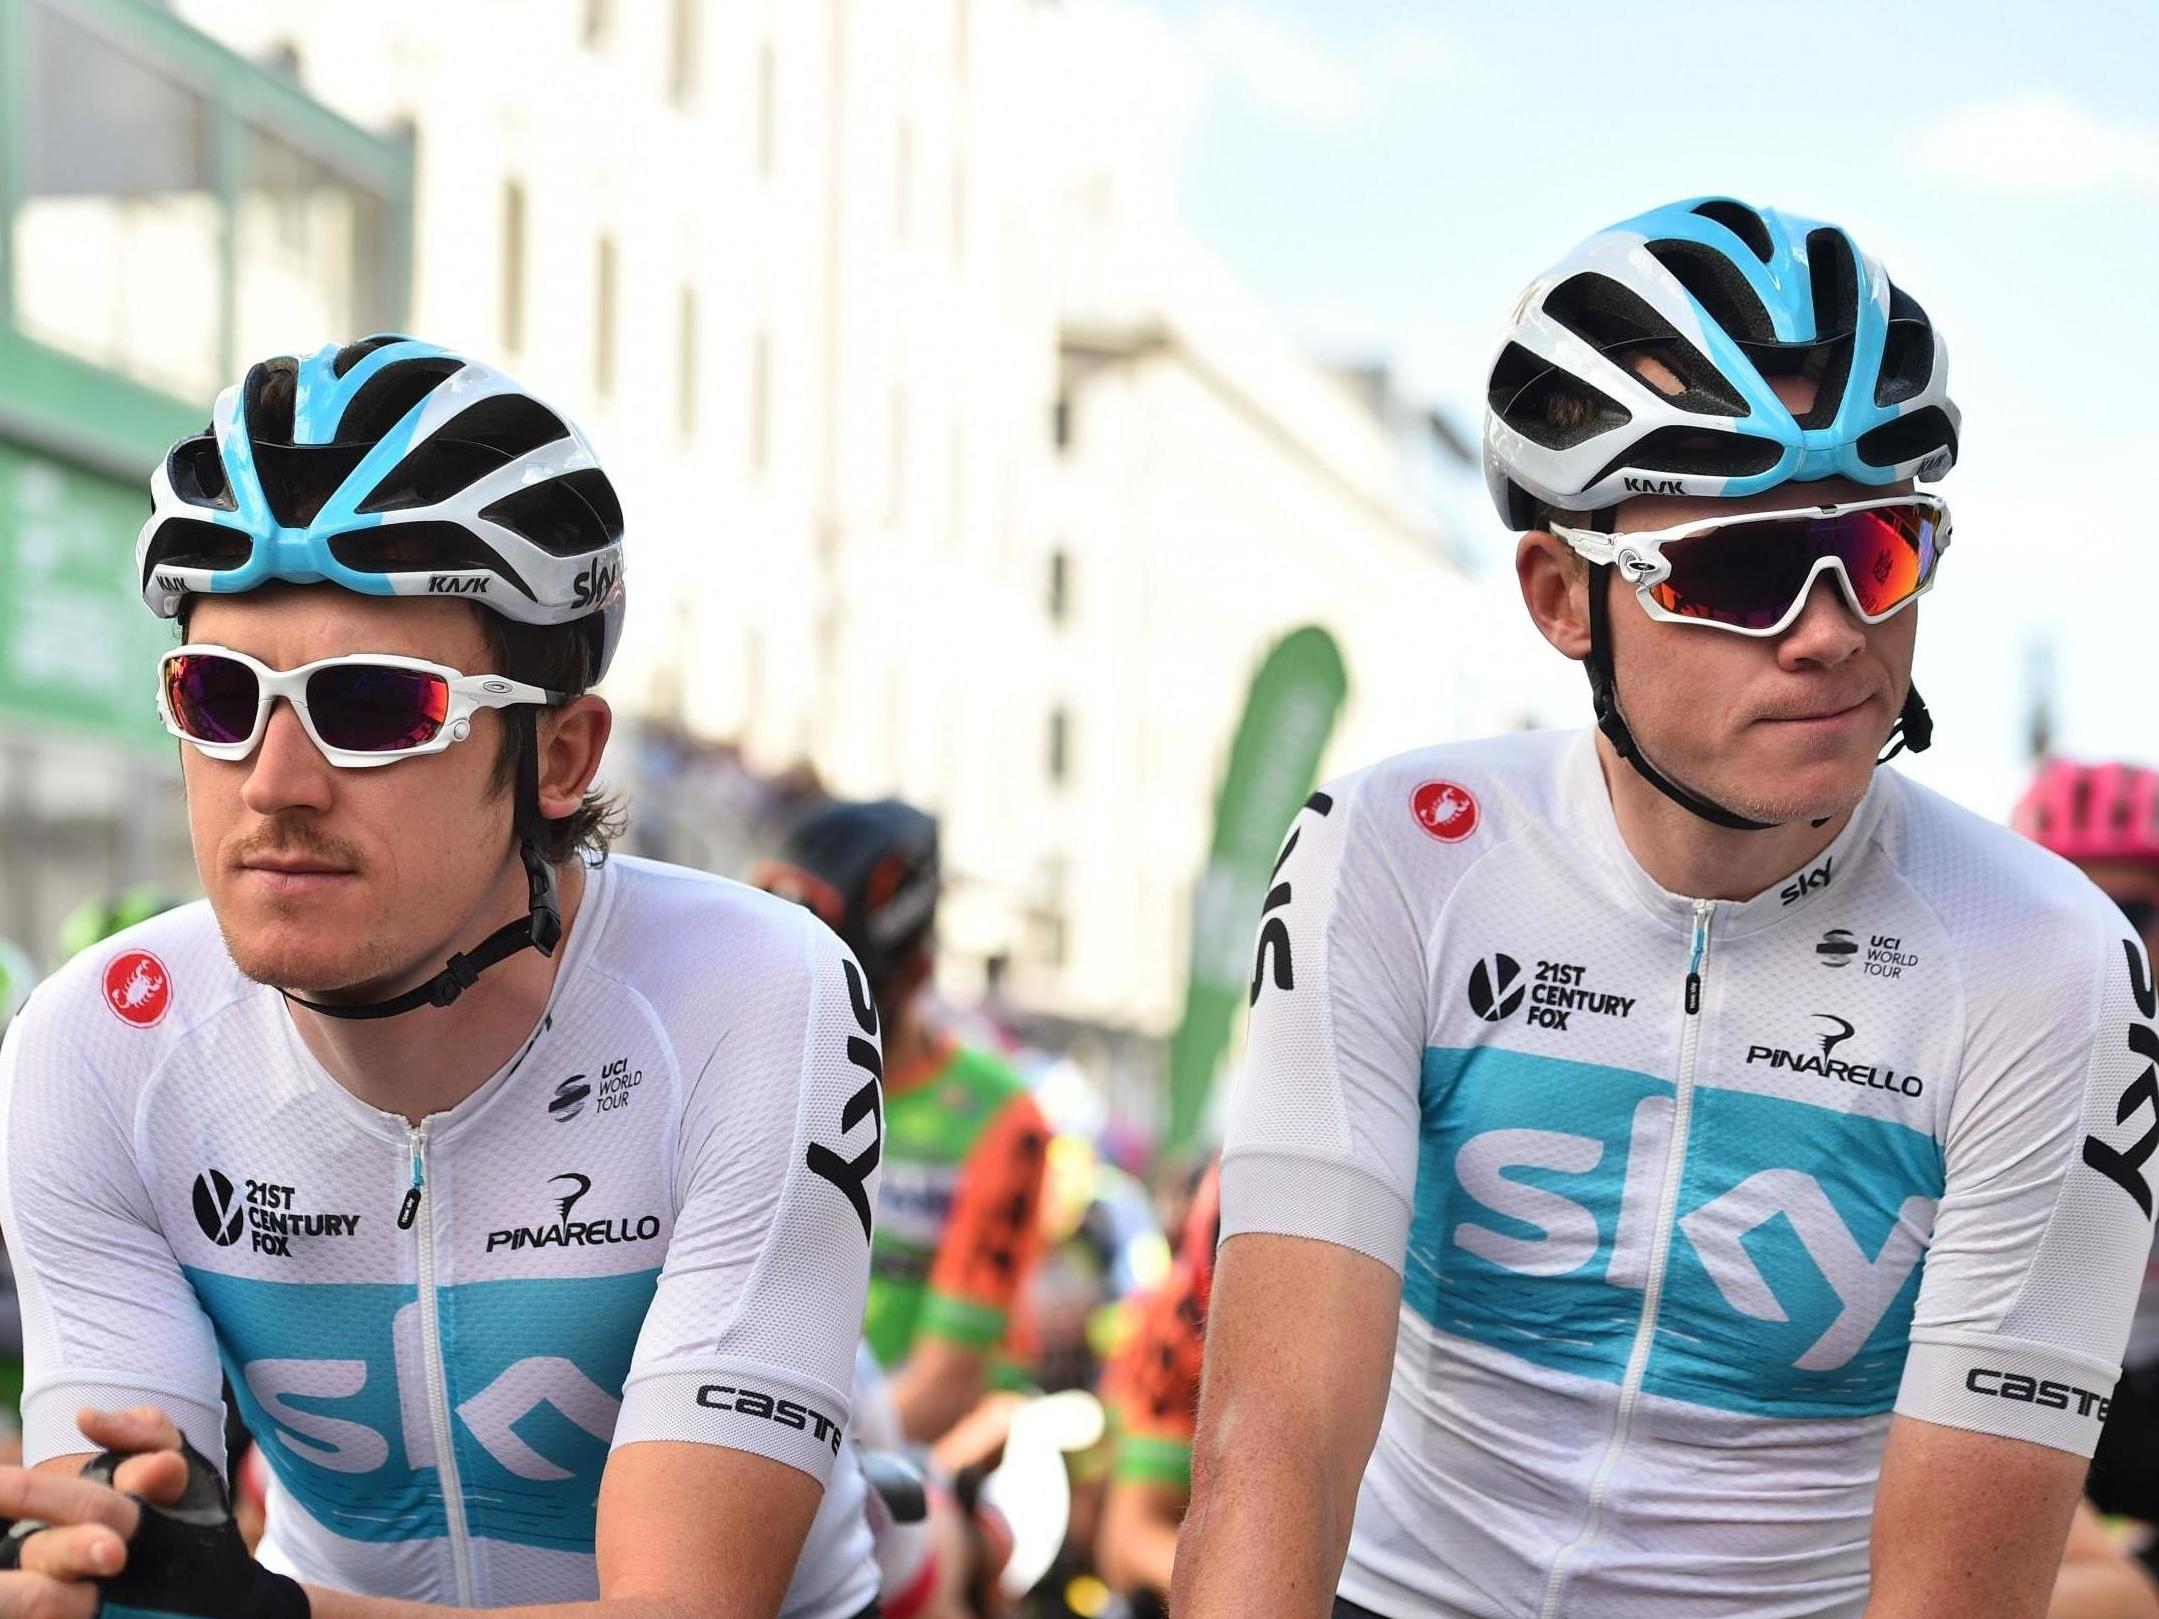 Geraint Thomas and Chris Froome face uncertain futures after Team Sky's decision